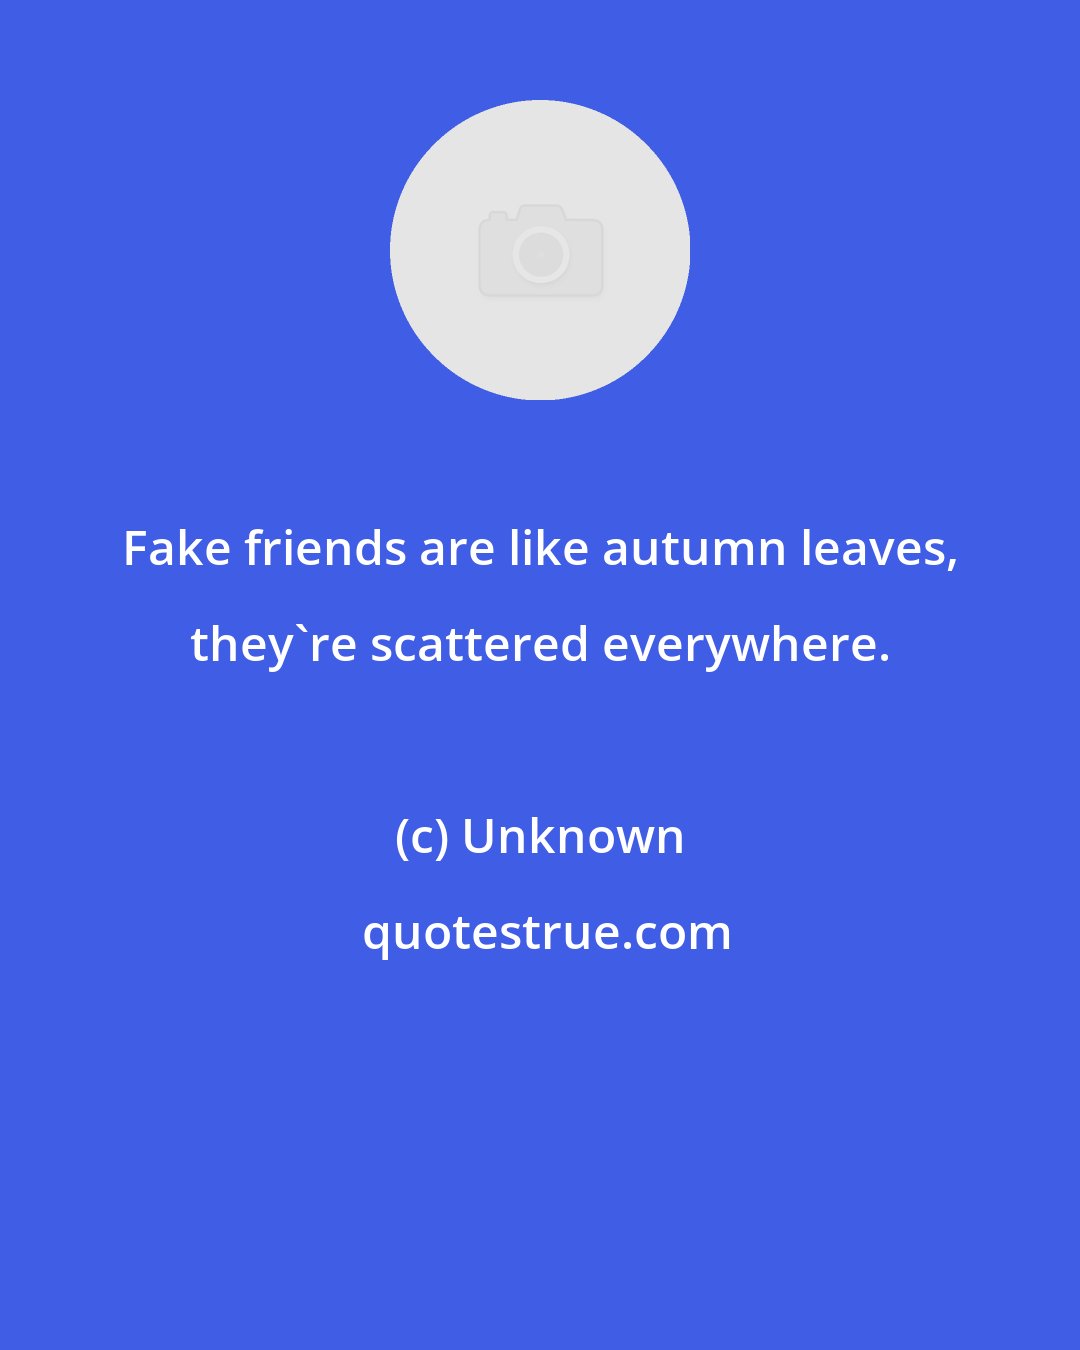 Unknown: Fake friends are like autumn leaves, they're scattered everywhere.